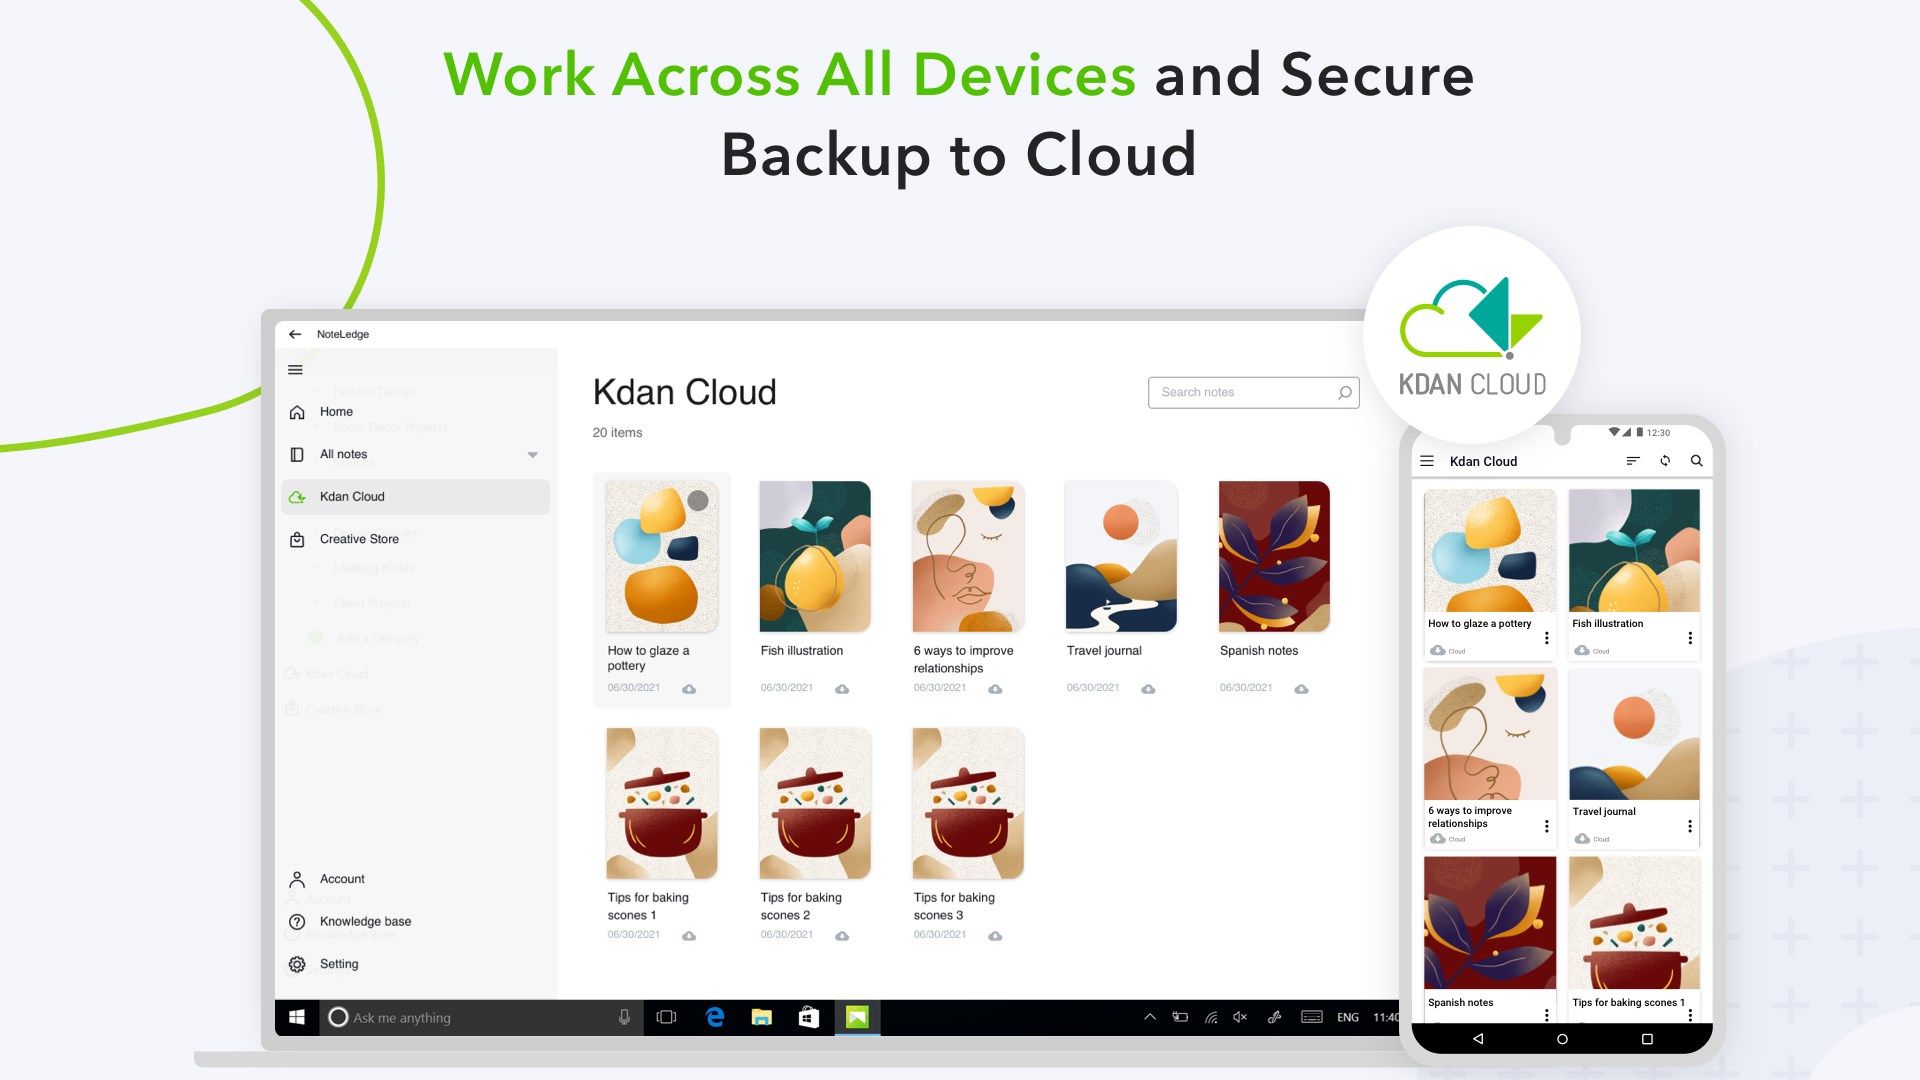 Work Across All Devices and Secure Backup to Cloud